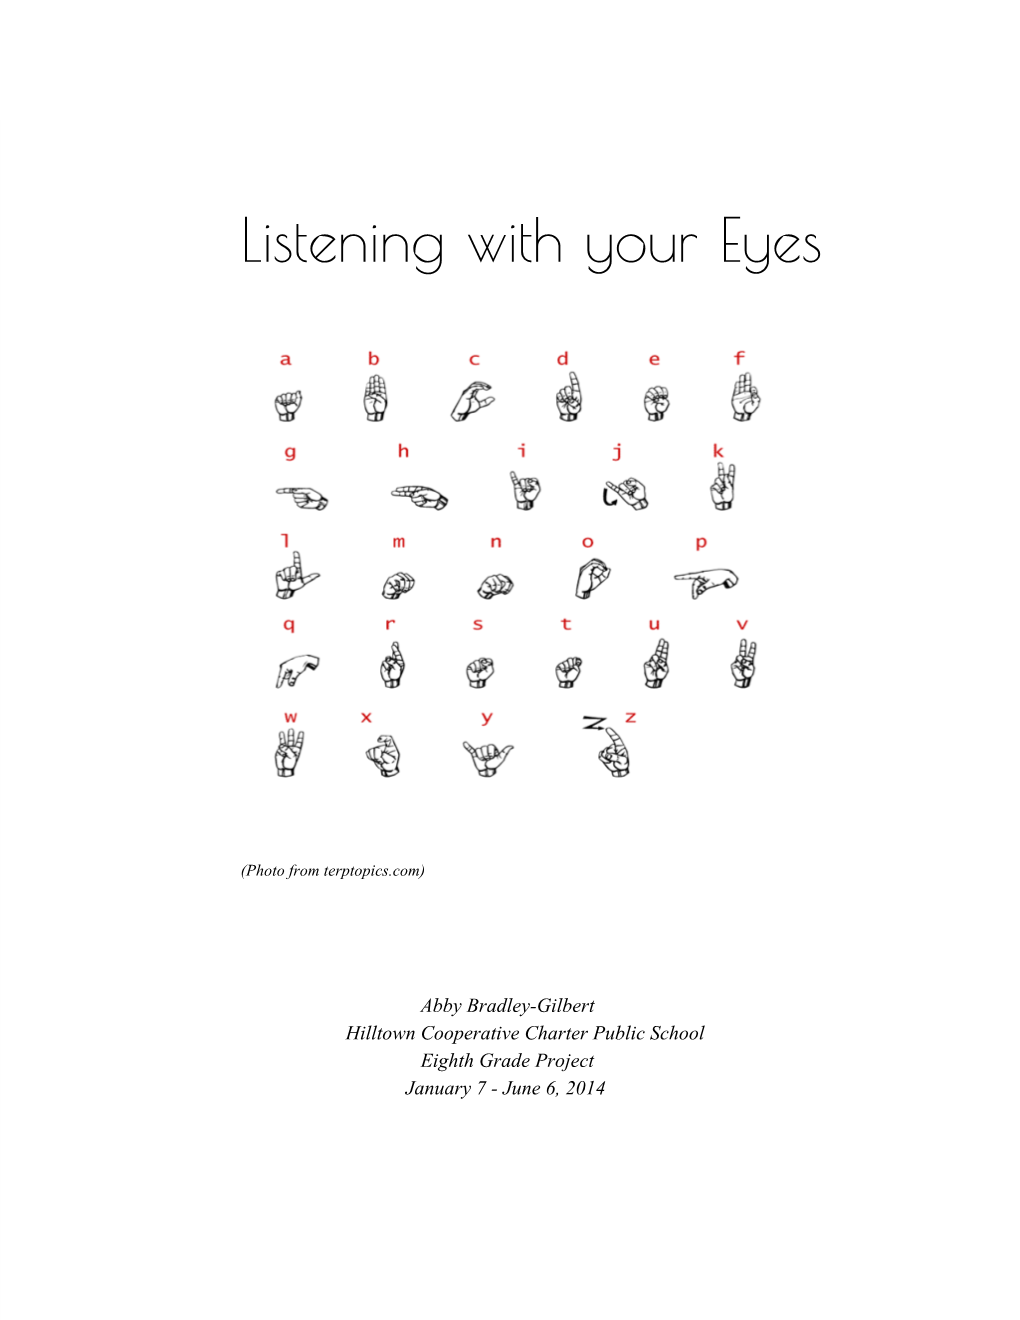 Listening with Your Eyes